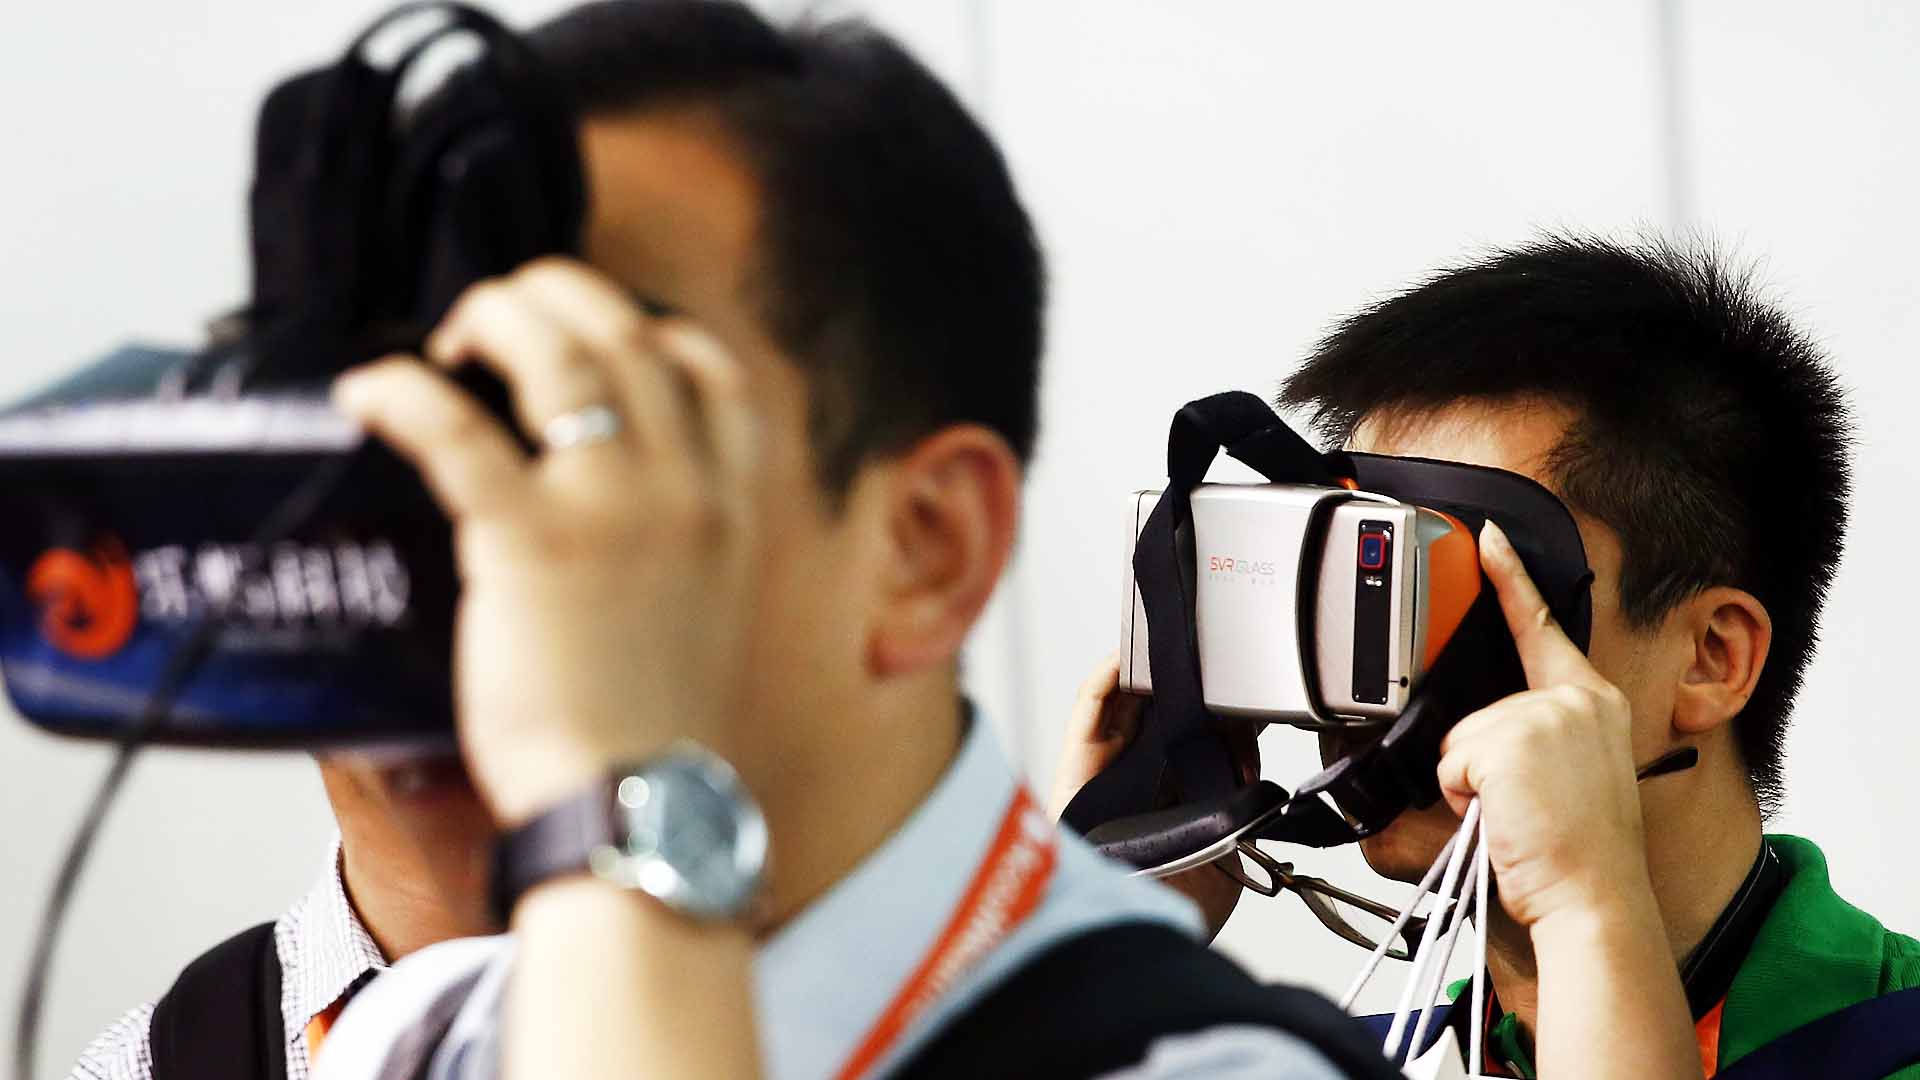 Visitors try on virtual reality glasses from SVR Glass during the first Consumer Electronics Show (CES) in Asia in Shanghai on May 25, 2015. Photo: AFP